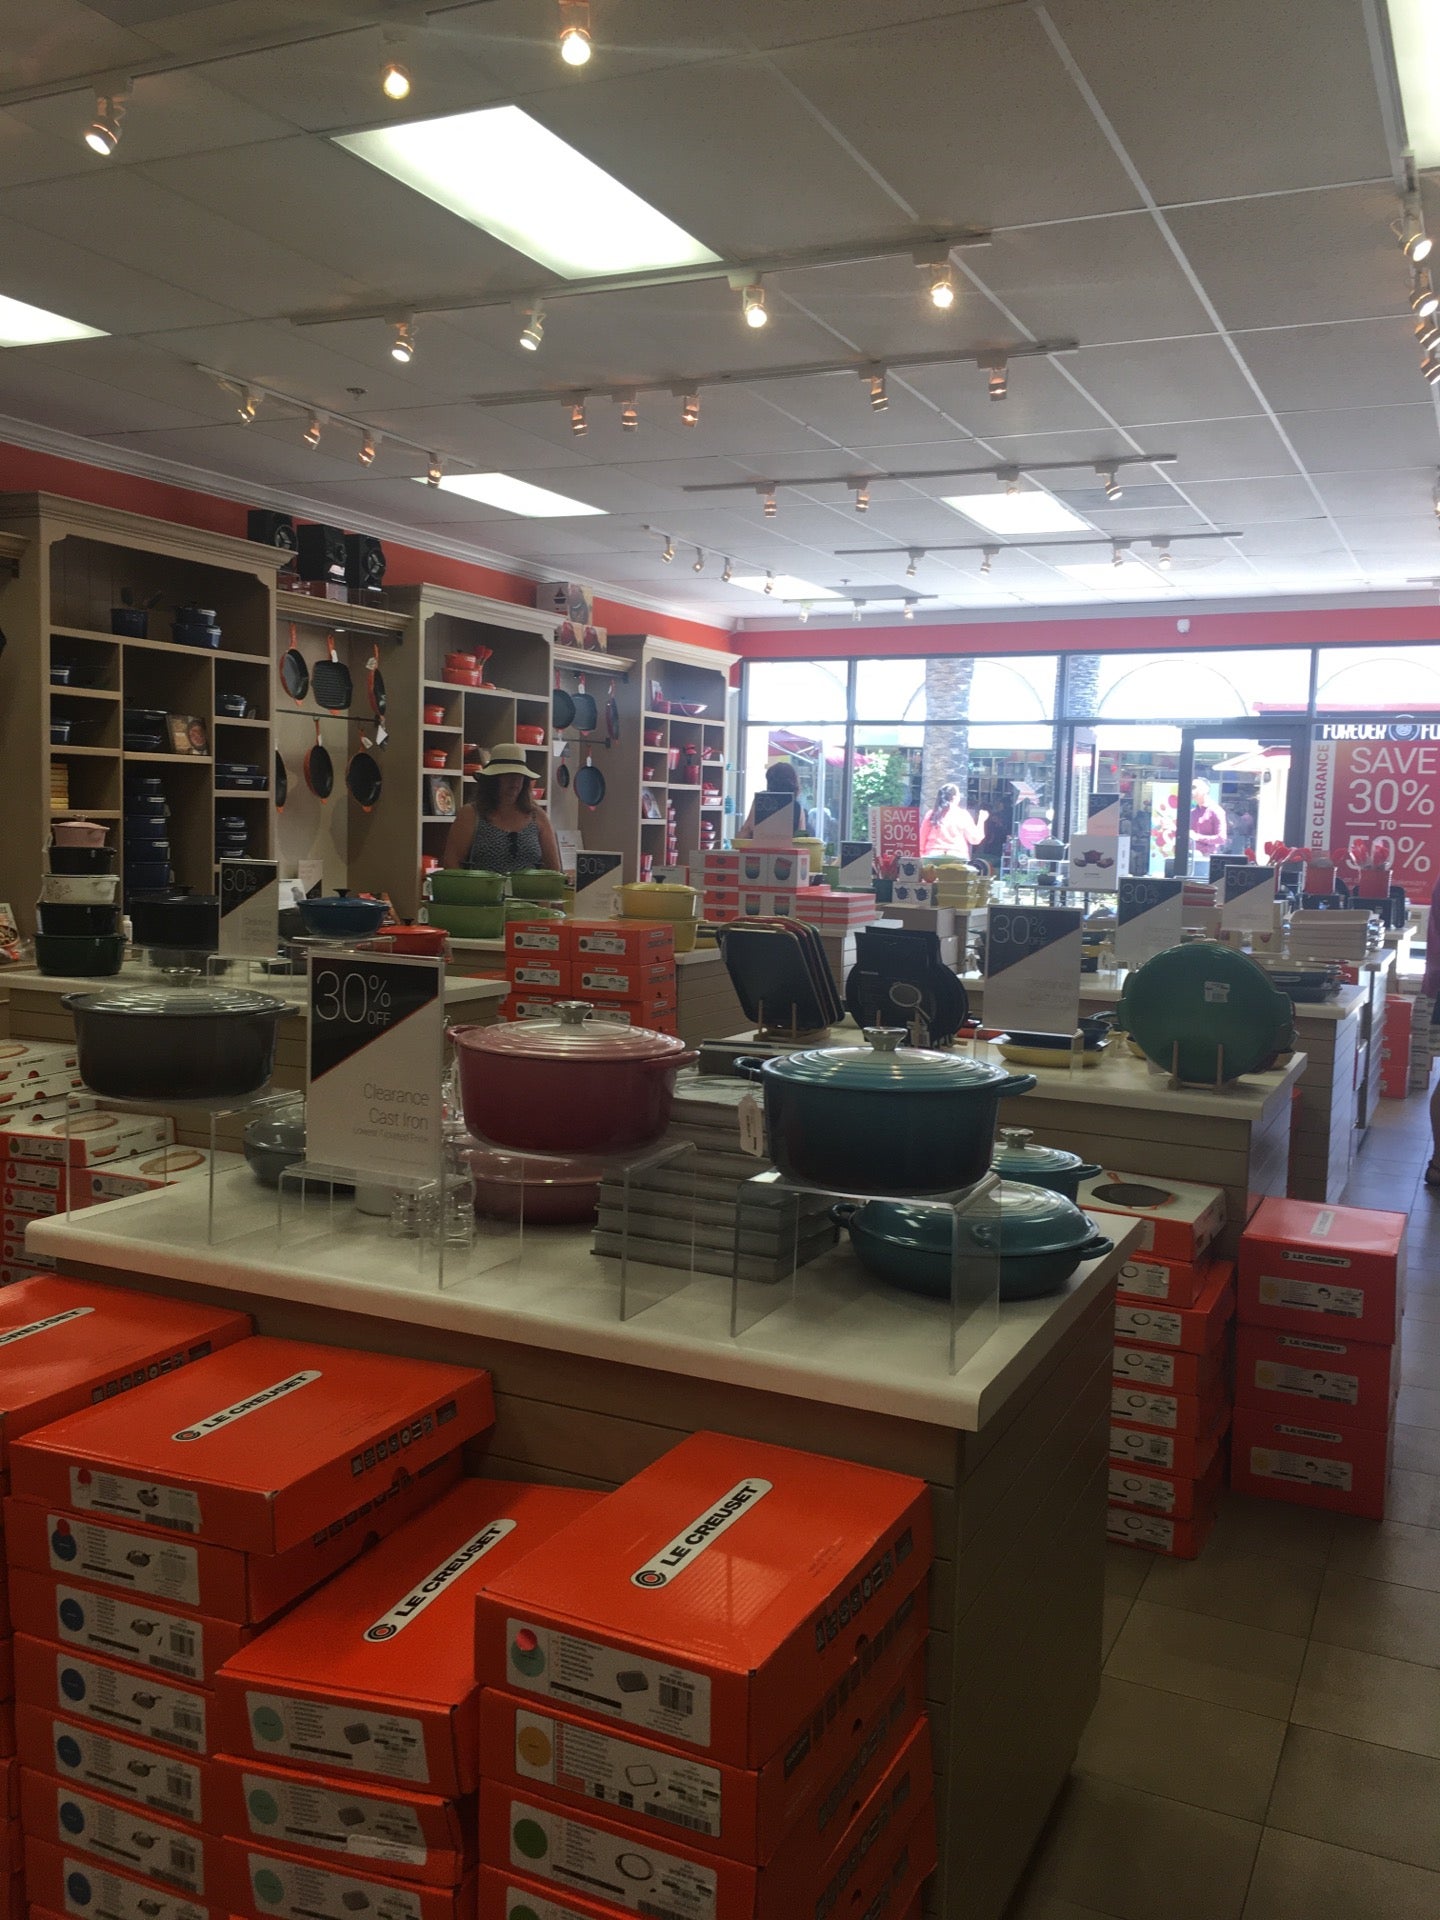 Le Creuset Outlet Store, 5620 Paseo del Norte, Carlsbad, CA, Home Centers -  MapQuest